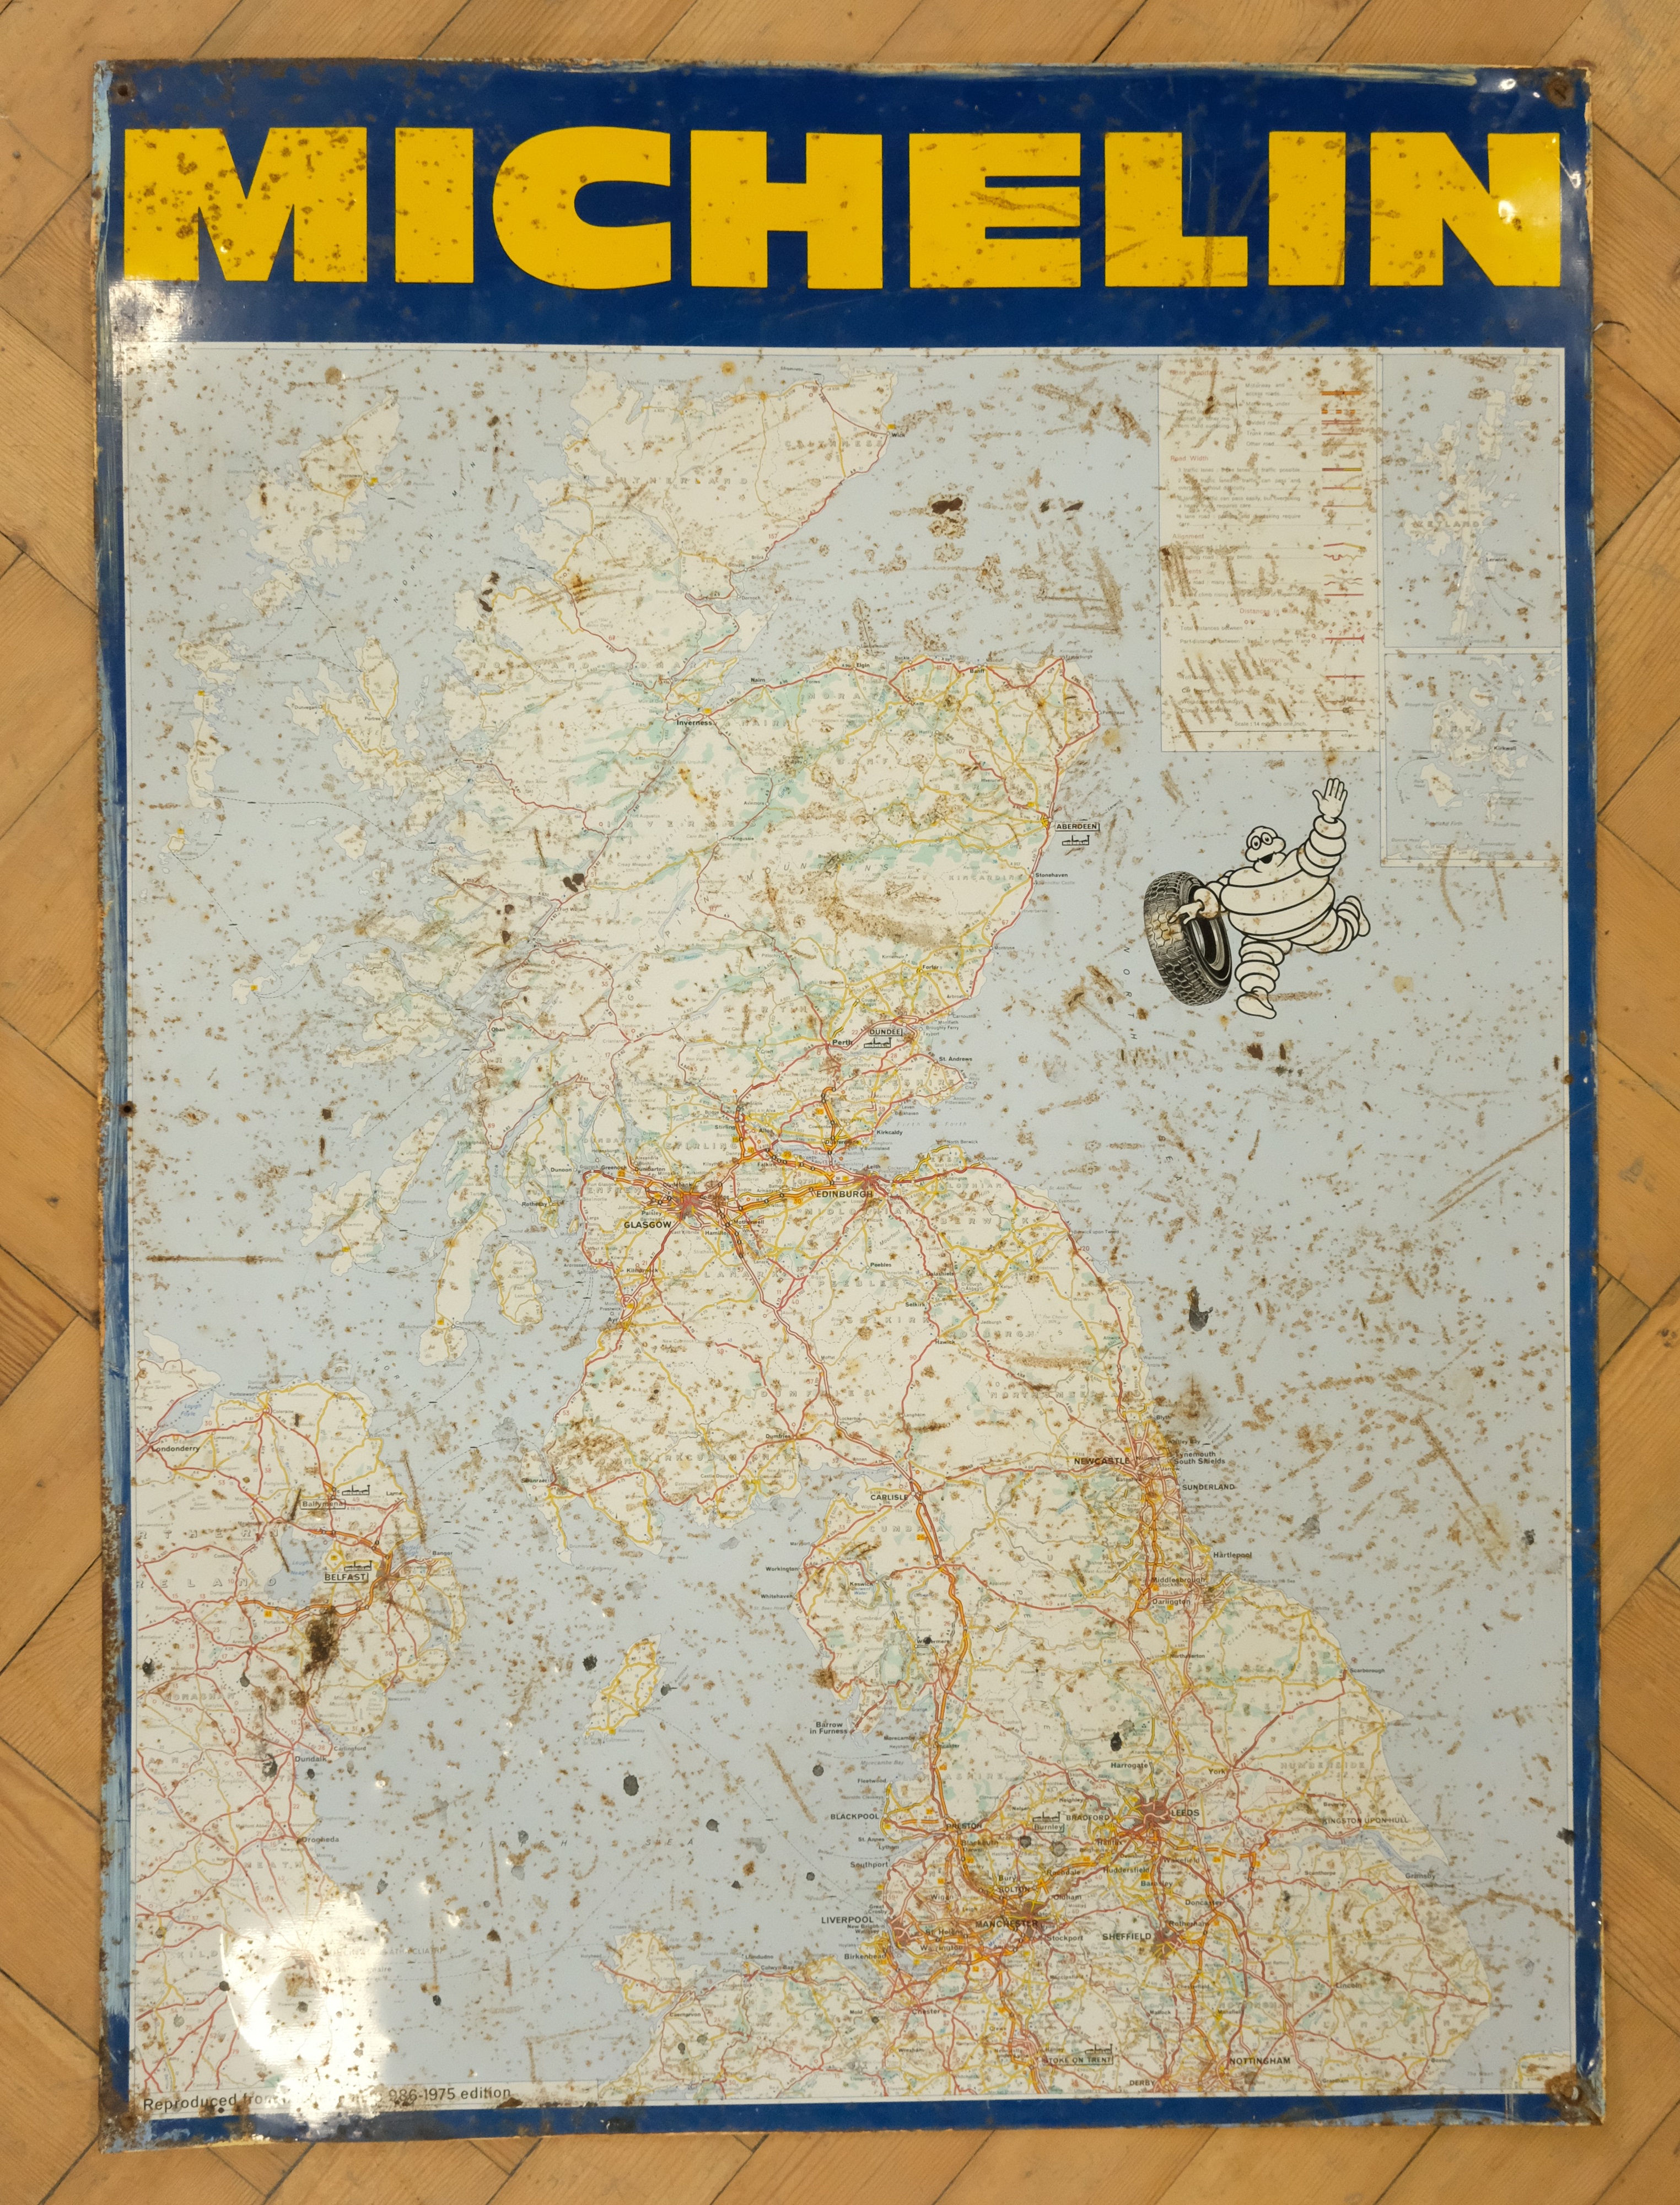 A 1970s Michelin tinplate road map of the North of the United Kingdom, dated 1975, 87 cm x 63 cm